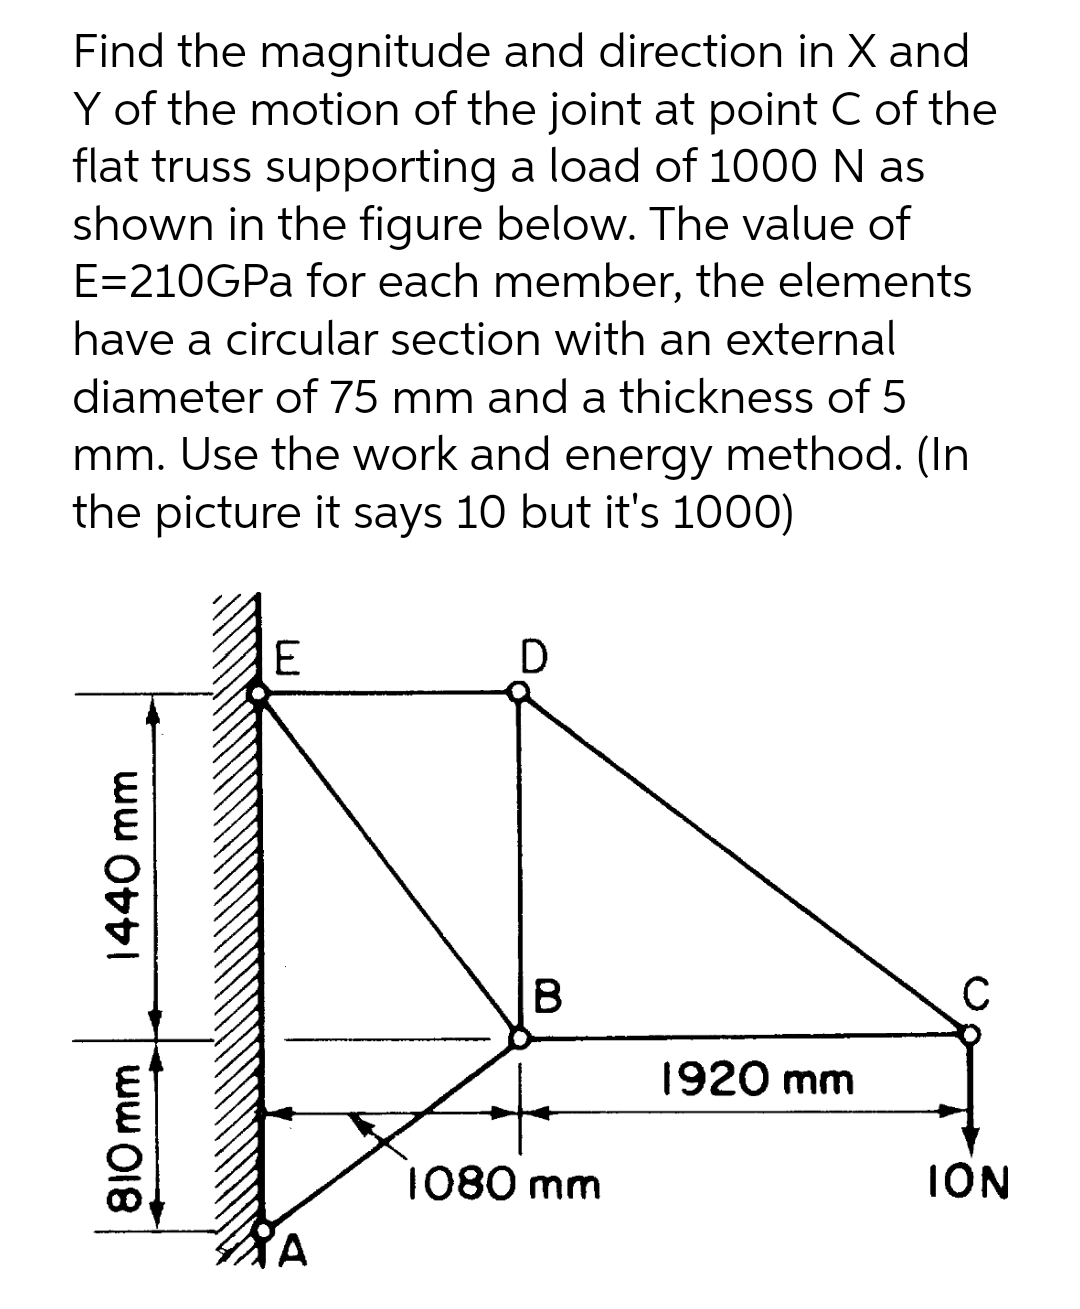 Find the magnitude and direction in X and
Y of the motion of the joint at point C of the
flat truss supporting a load of 1000 N as
shown in the figure below. The value of
E=210GPA for each member, the elements
have a circular section with an external
diameter of 75 mm and a thickness of 5
mm. Use the work and energy method. (In
the picture it says 10 but it's 1000)
E
D
B
1920 mm
1080 mm
ION
810 mm
1440 mm
